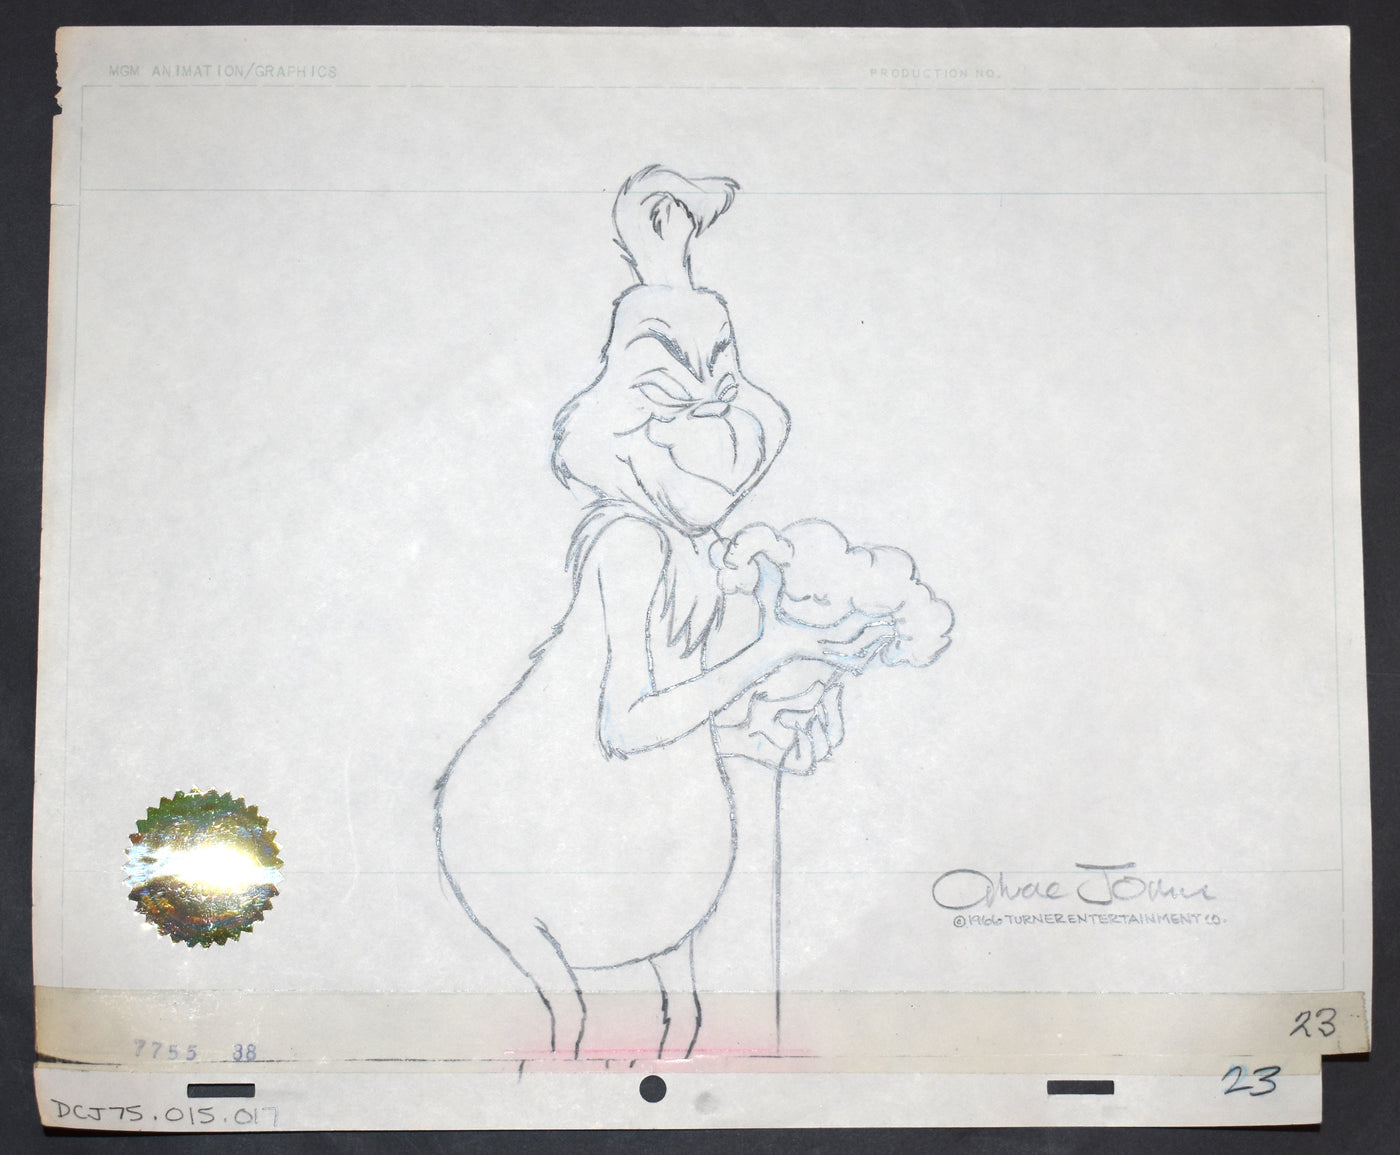 Original Chuck Jones Production Drawing of The Grinch from How the Grinch Stole Christmas, Signed by Chuck Jones